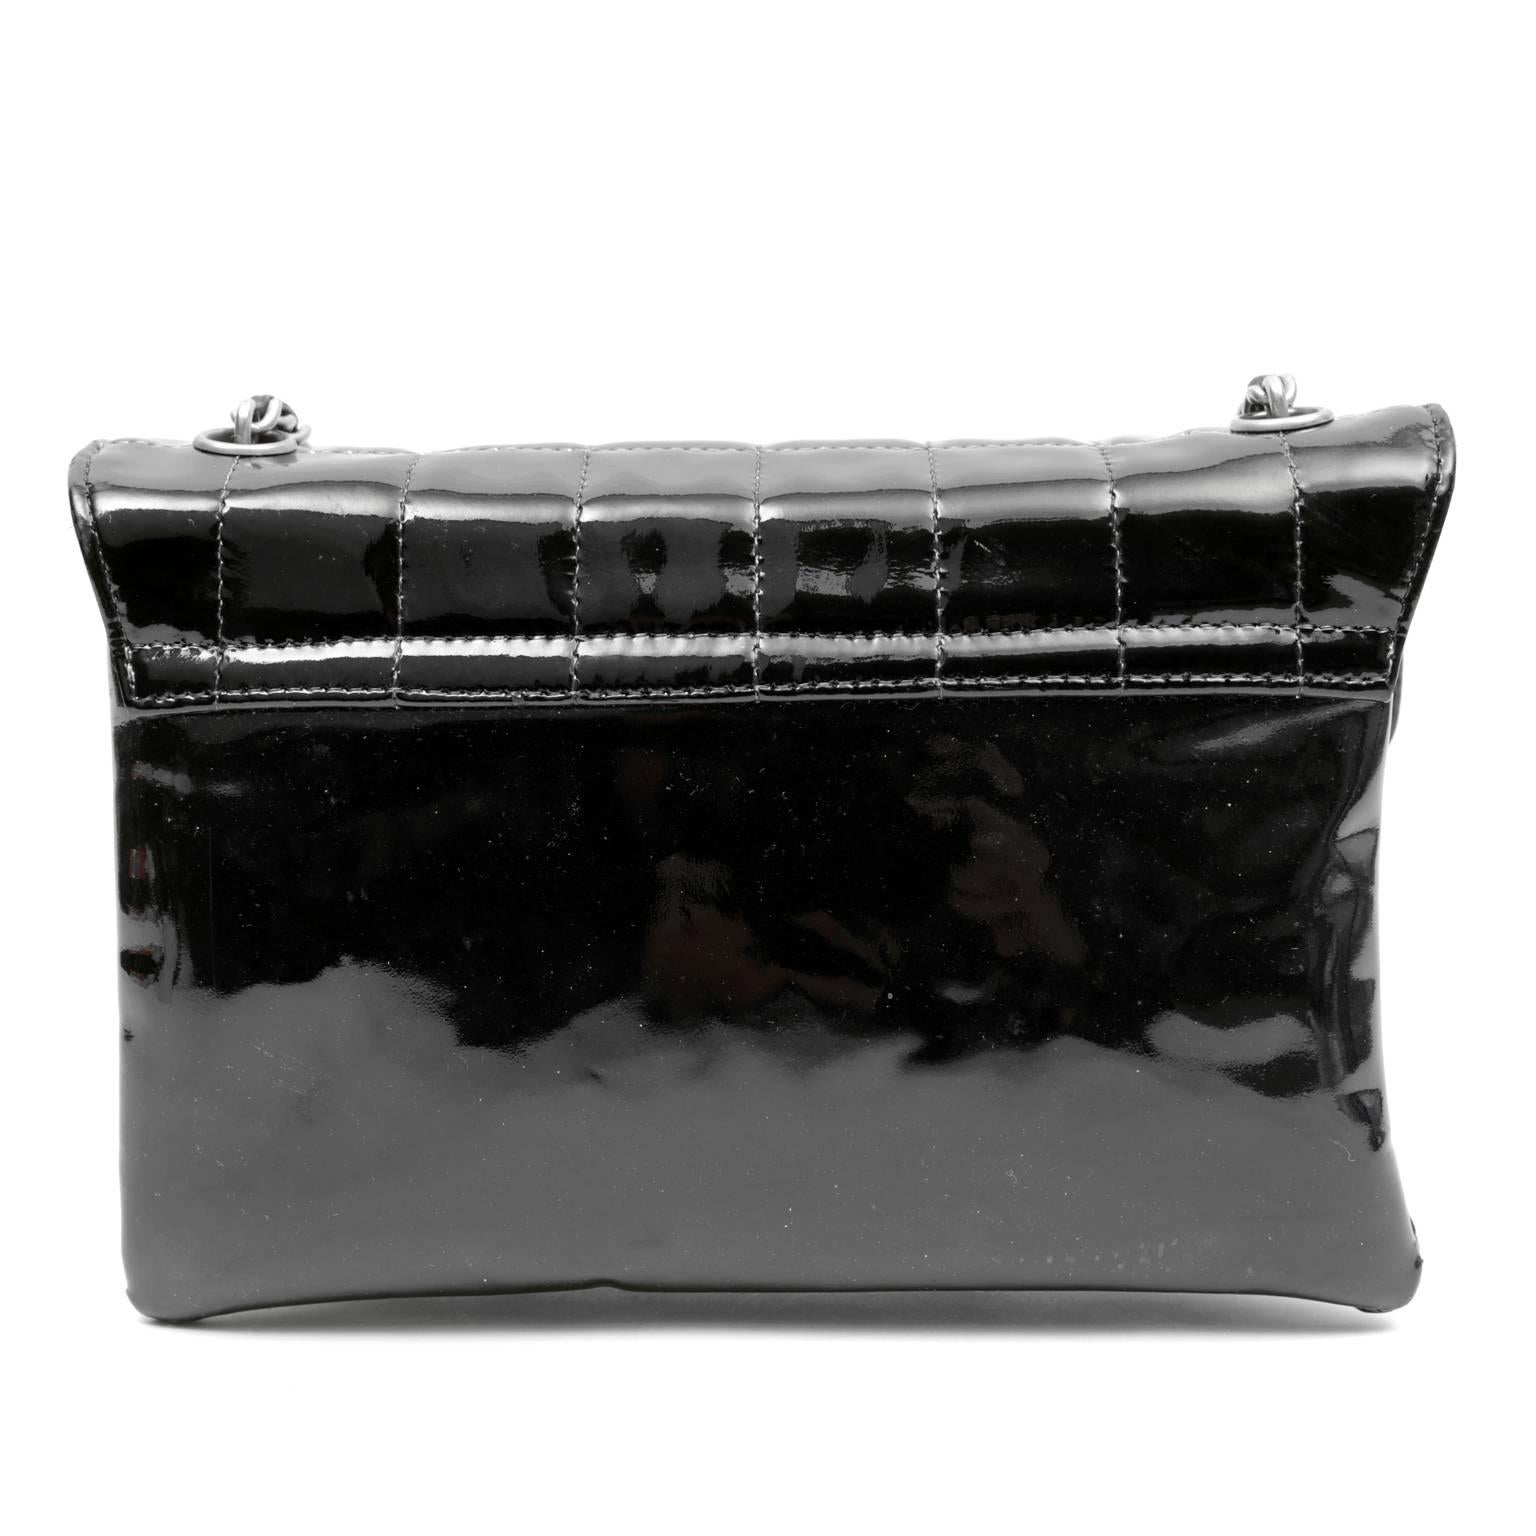 Chanel Black Patent Leather Keyboard Flap Bag- Pristine
  A whimsical closure makes this unique piece a fun addition to any collection.  

Black patent leather is stitched in square quilted pattern.  Black computer keys spell out CHANEL and